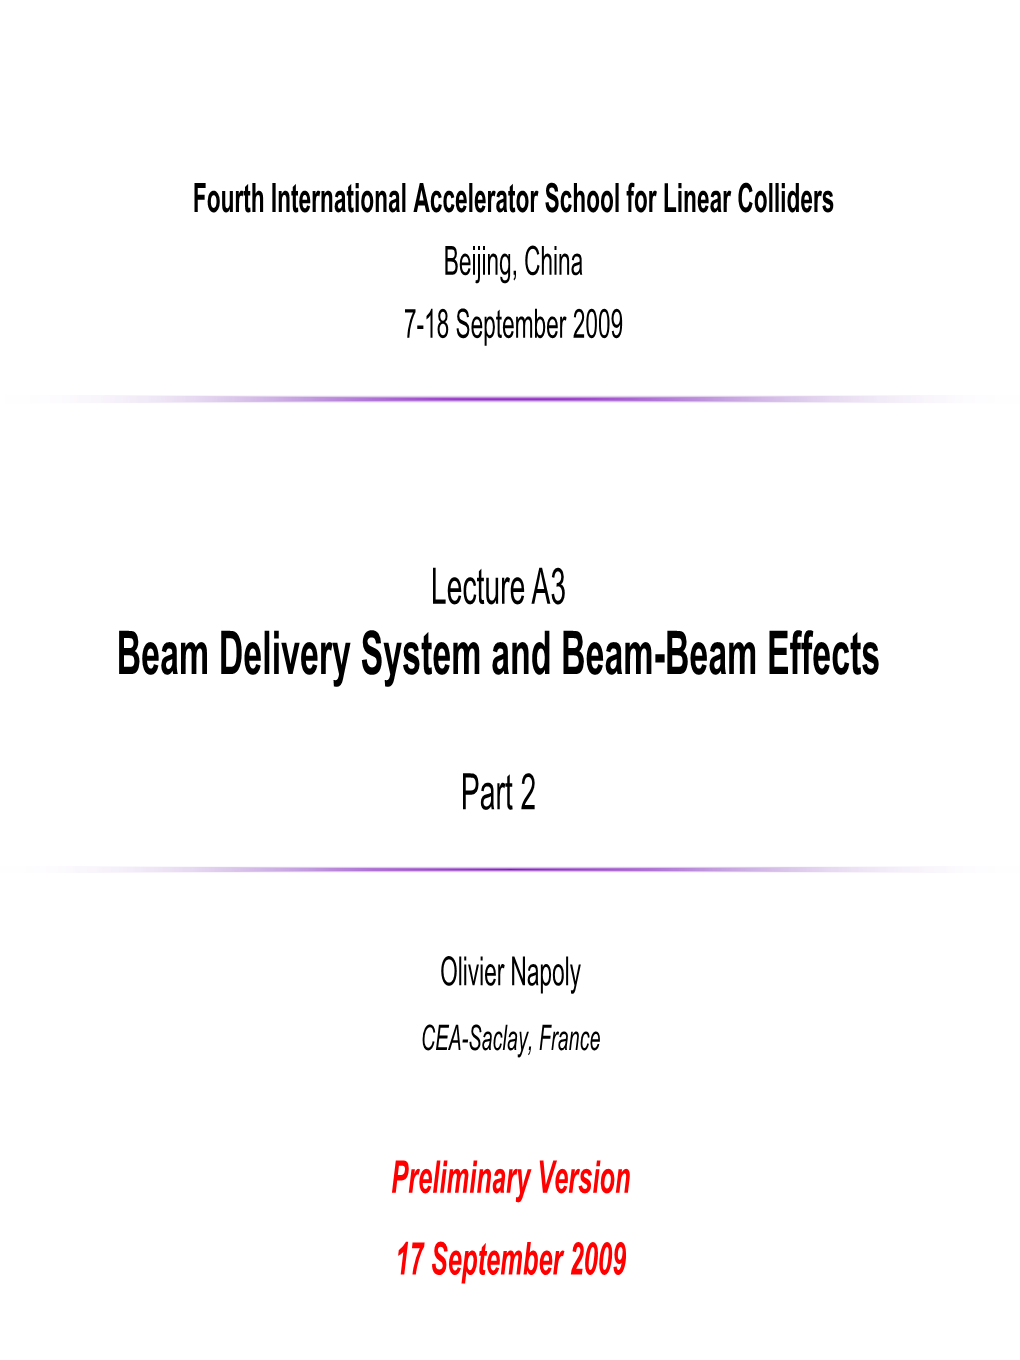 Beam Delivery System and Beam-Beam Effects